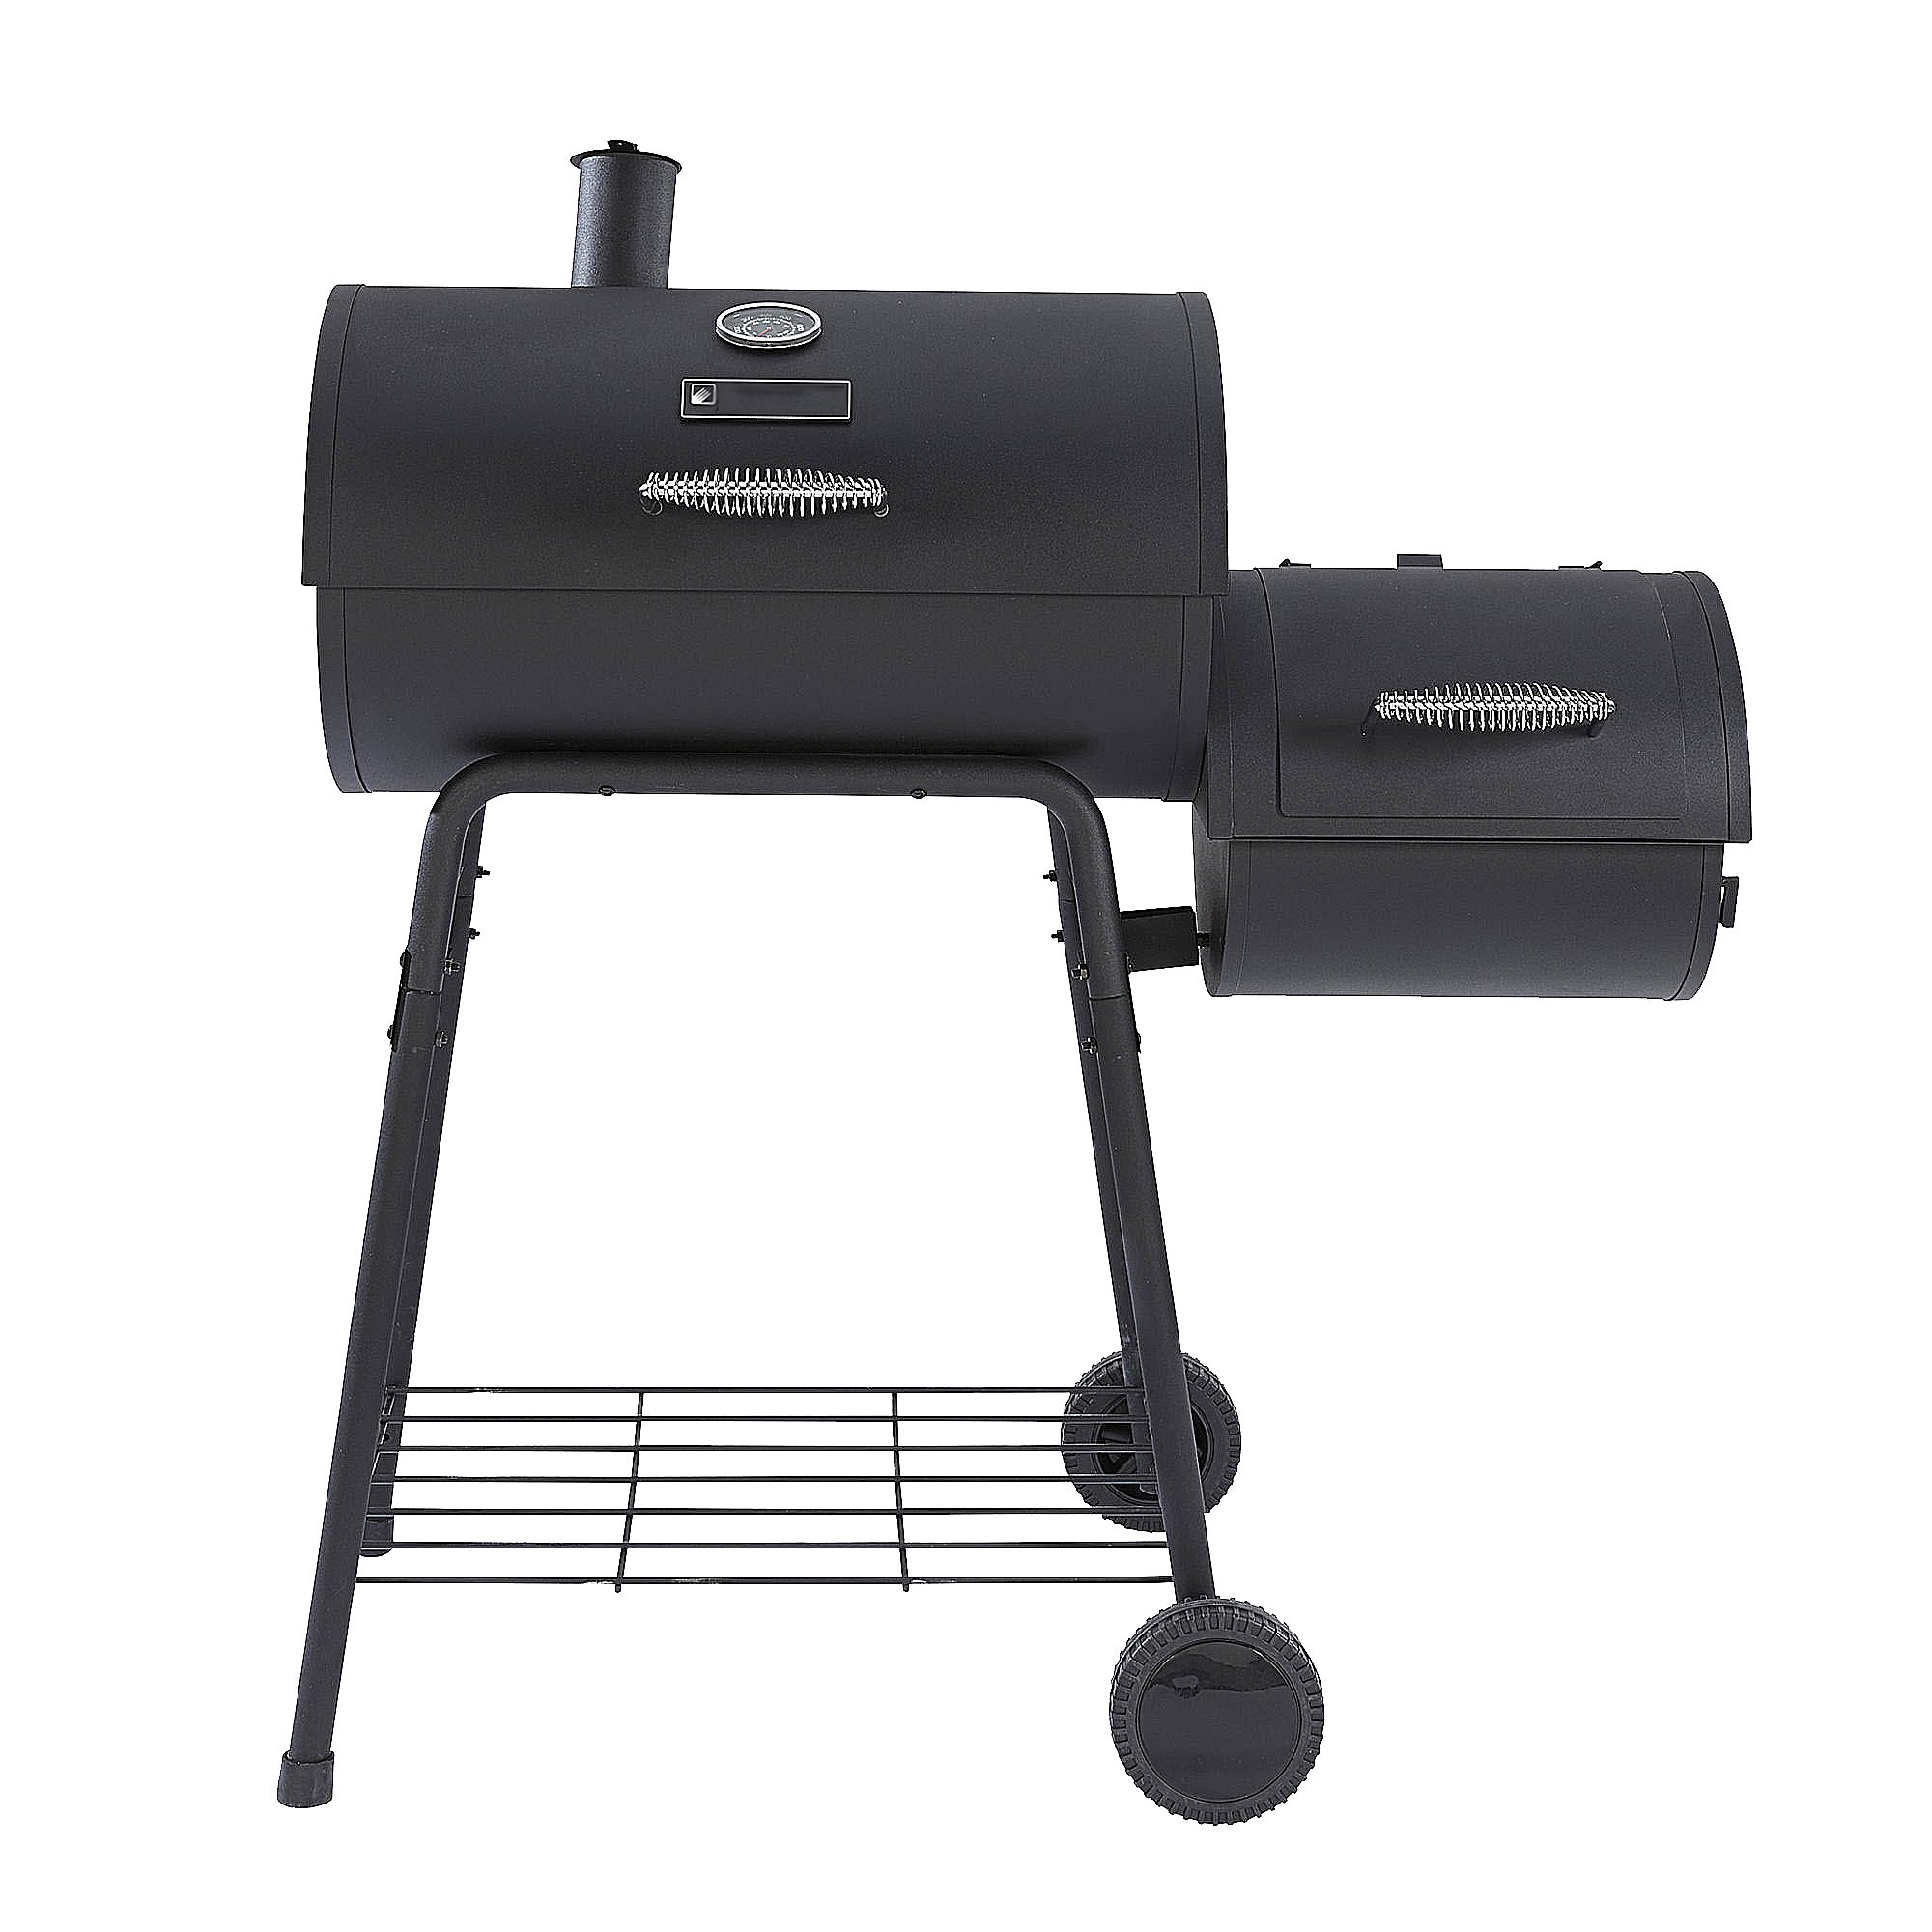 BBQ-Pro 23672 parts in stock